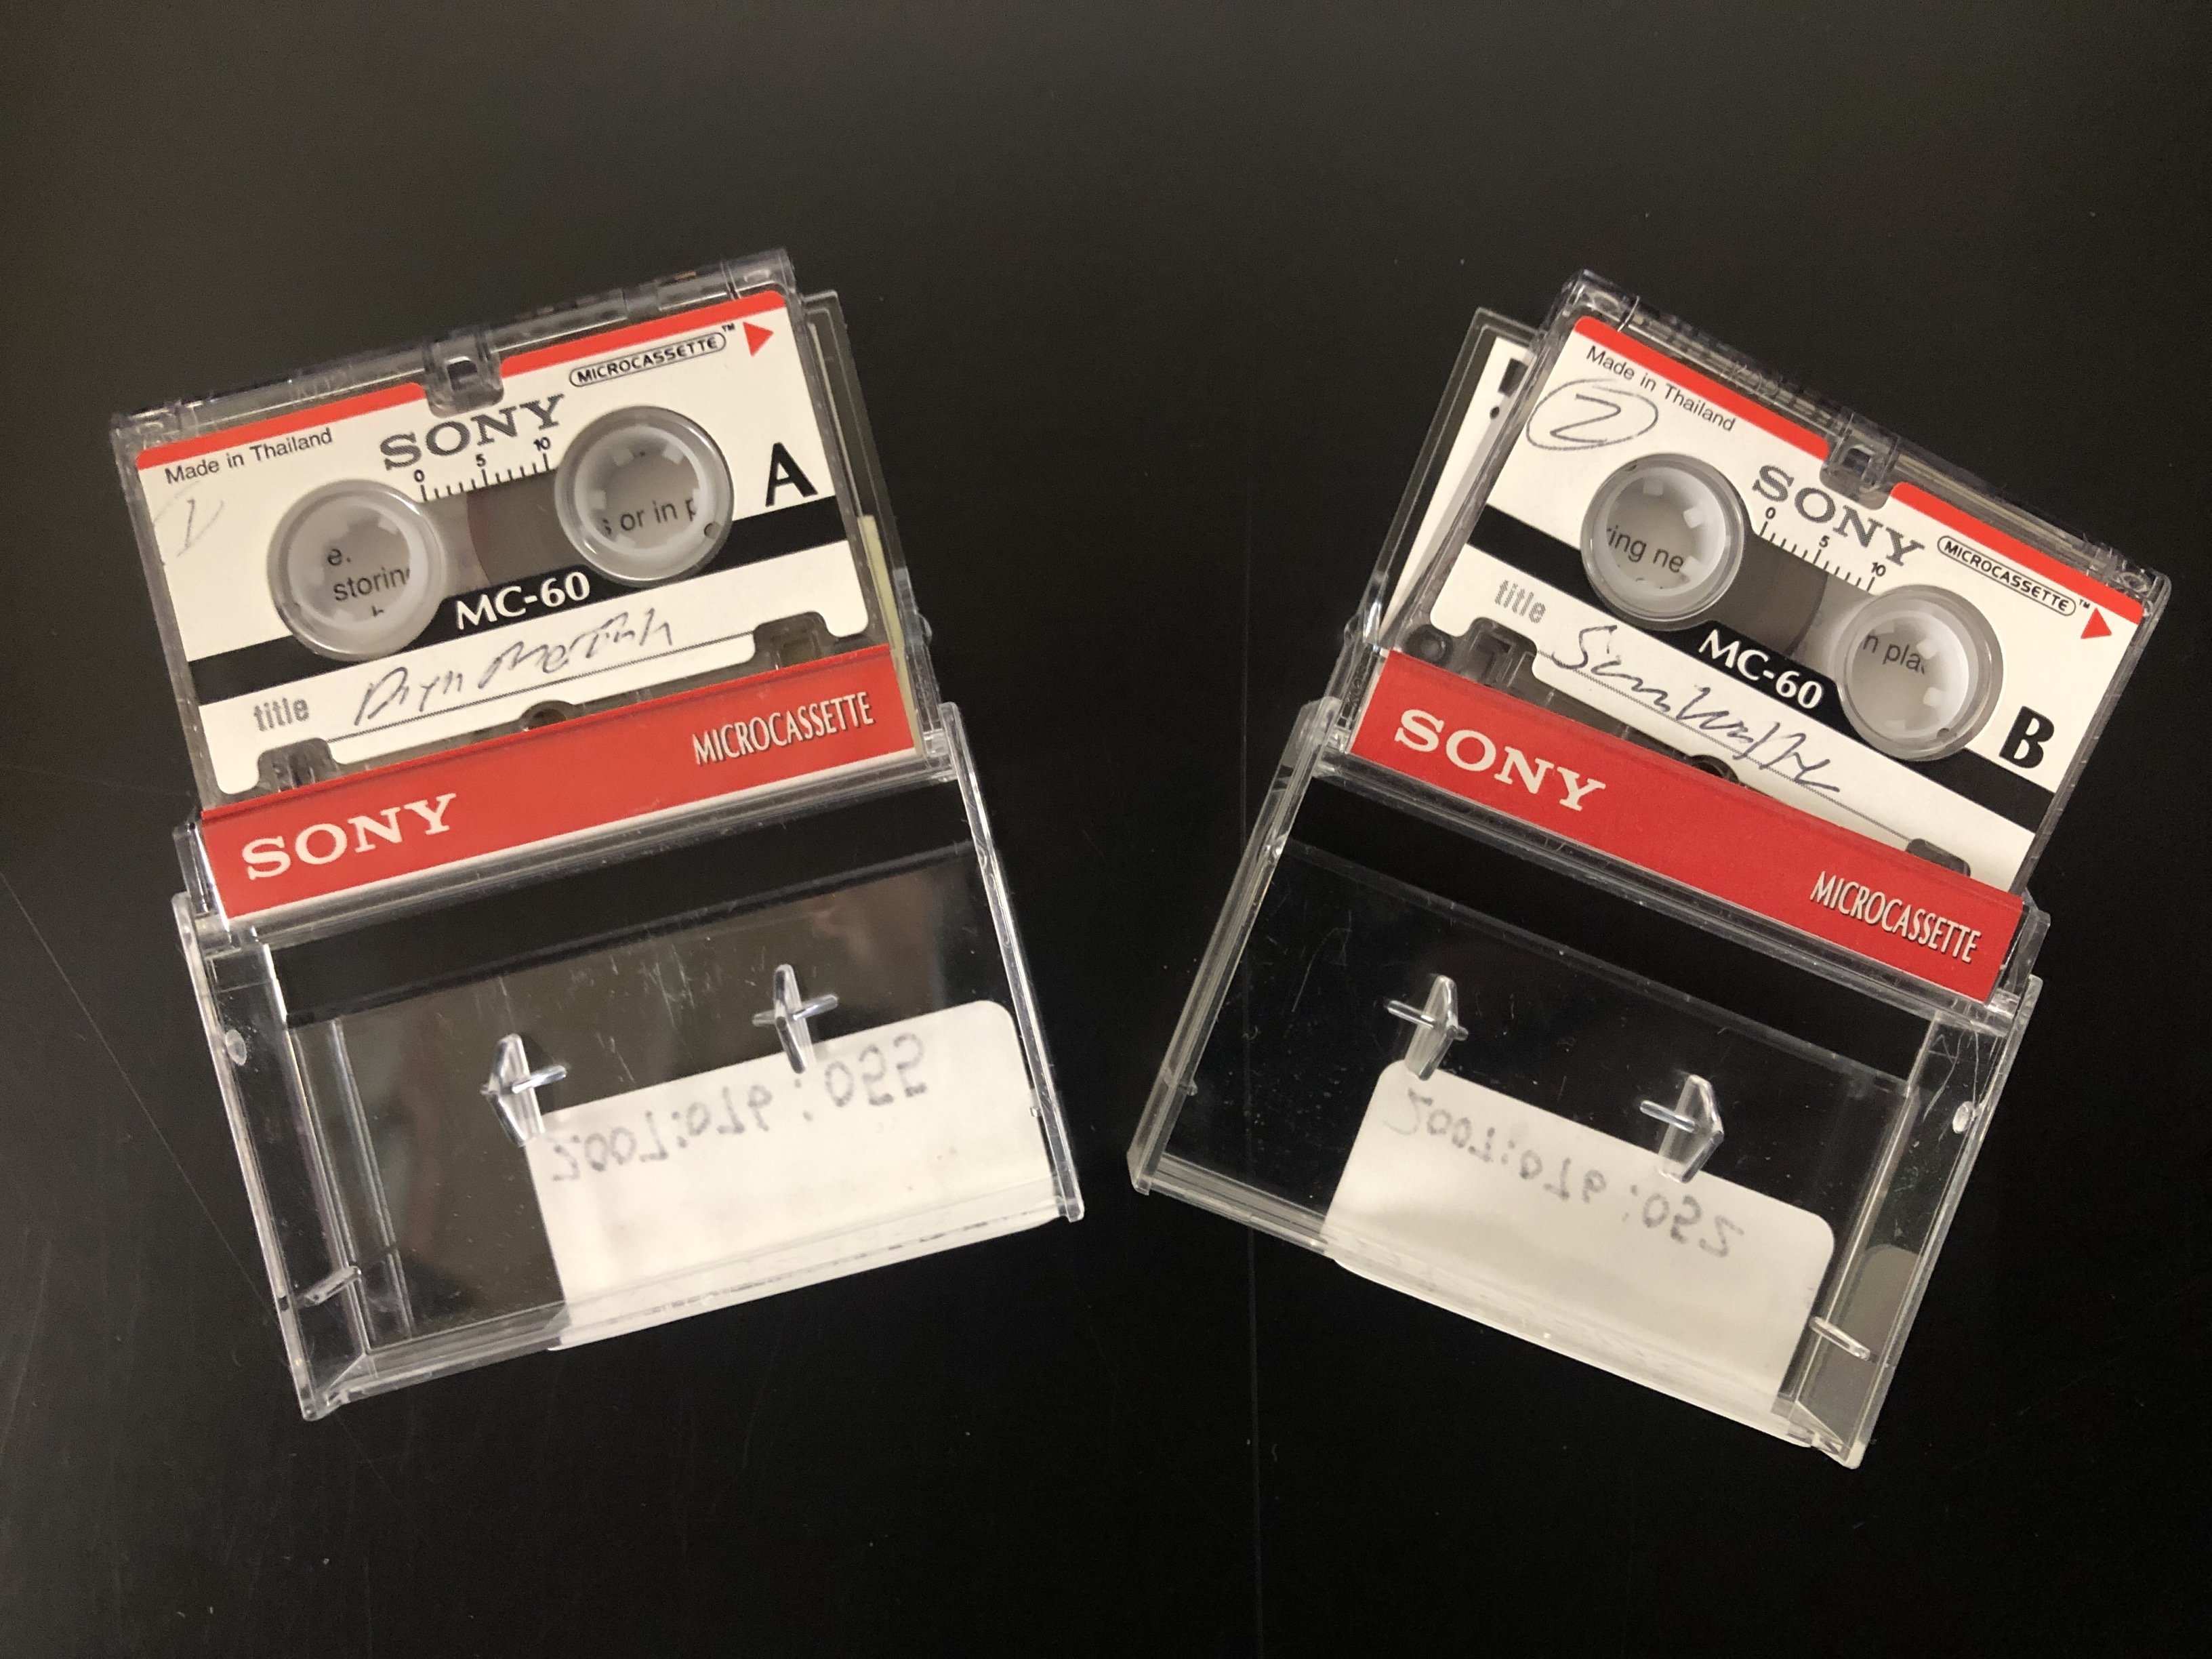 Hard-to-read mini-cassette annotations in the Ford Foundation Records.